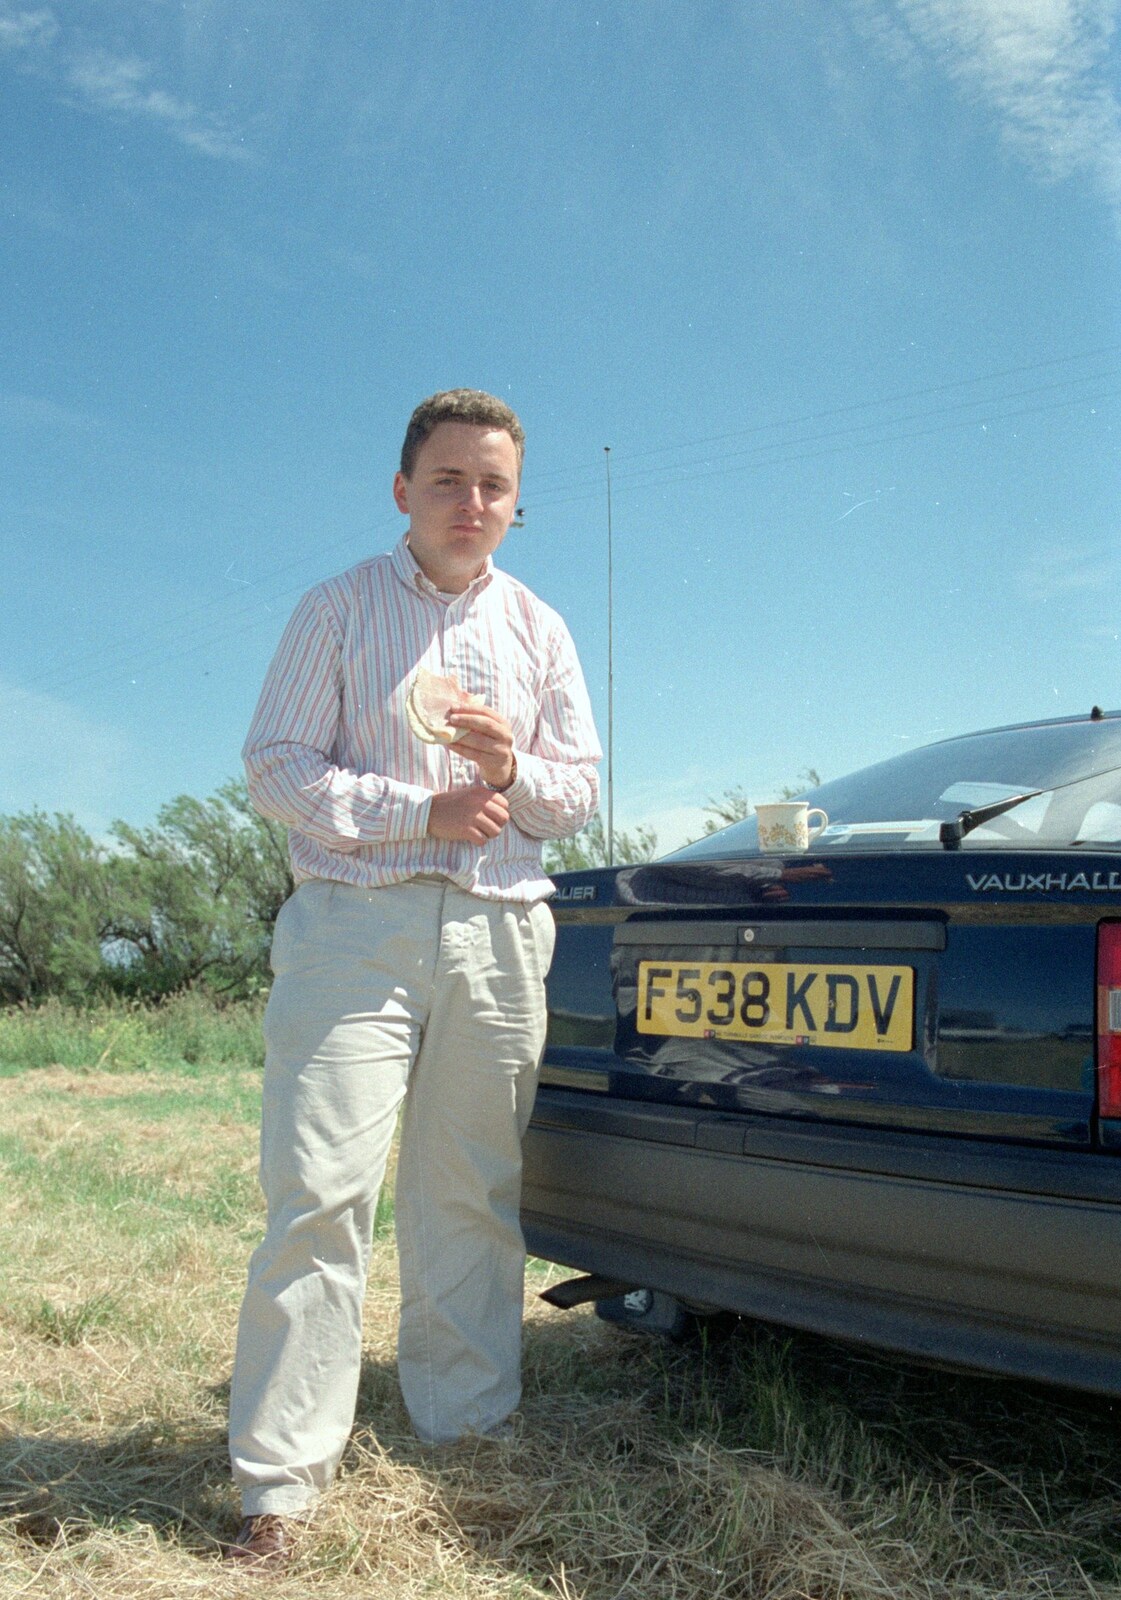 Andy stands next to his hired Mark 2 Vauxhall Cavalier from Uni: An End-of-it-all Trip to Land's End, Cornwall - 13th June 1989